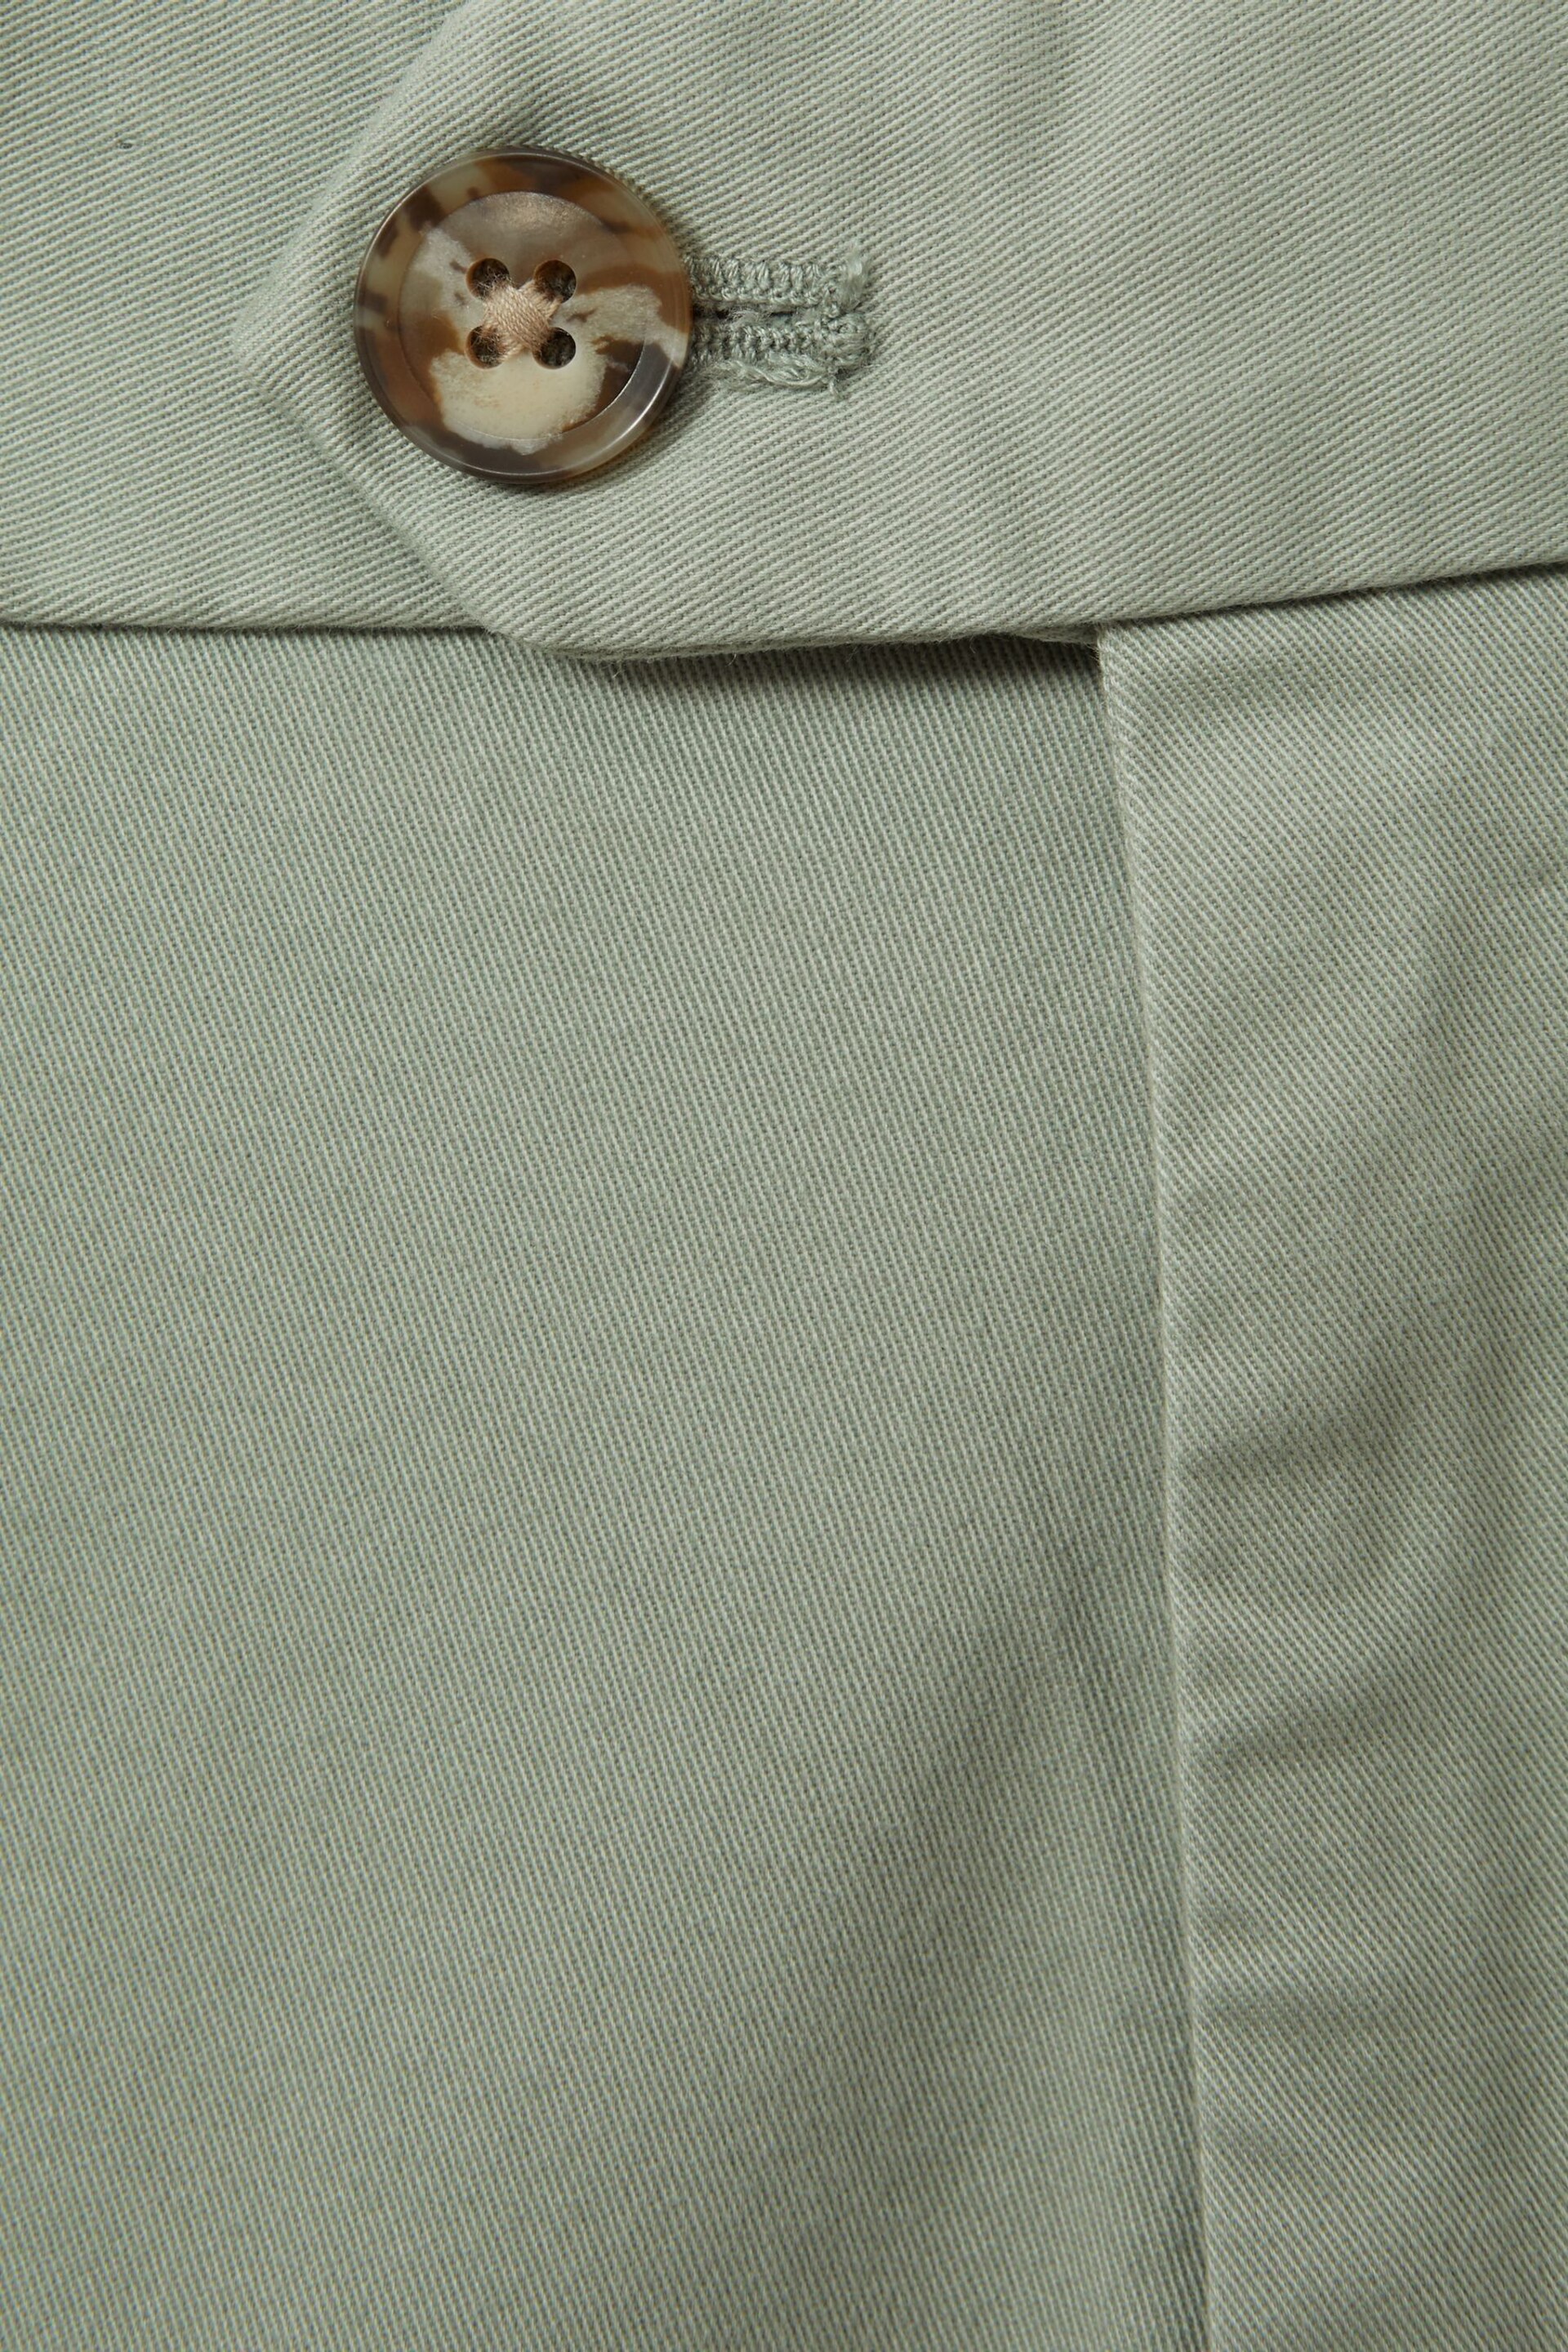 Reiss Pistachio Wicket Modern Fit Cotton Blend Chino Shorts - Image 5 of 5